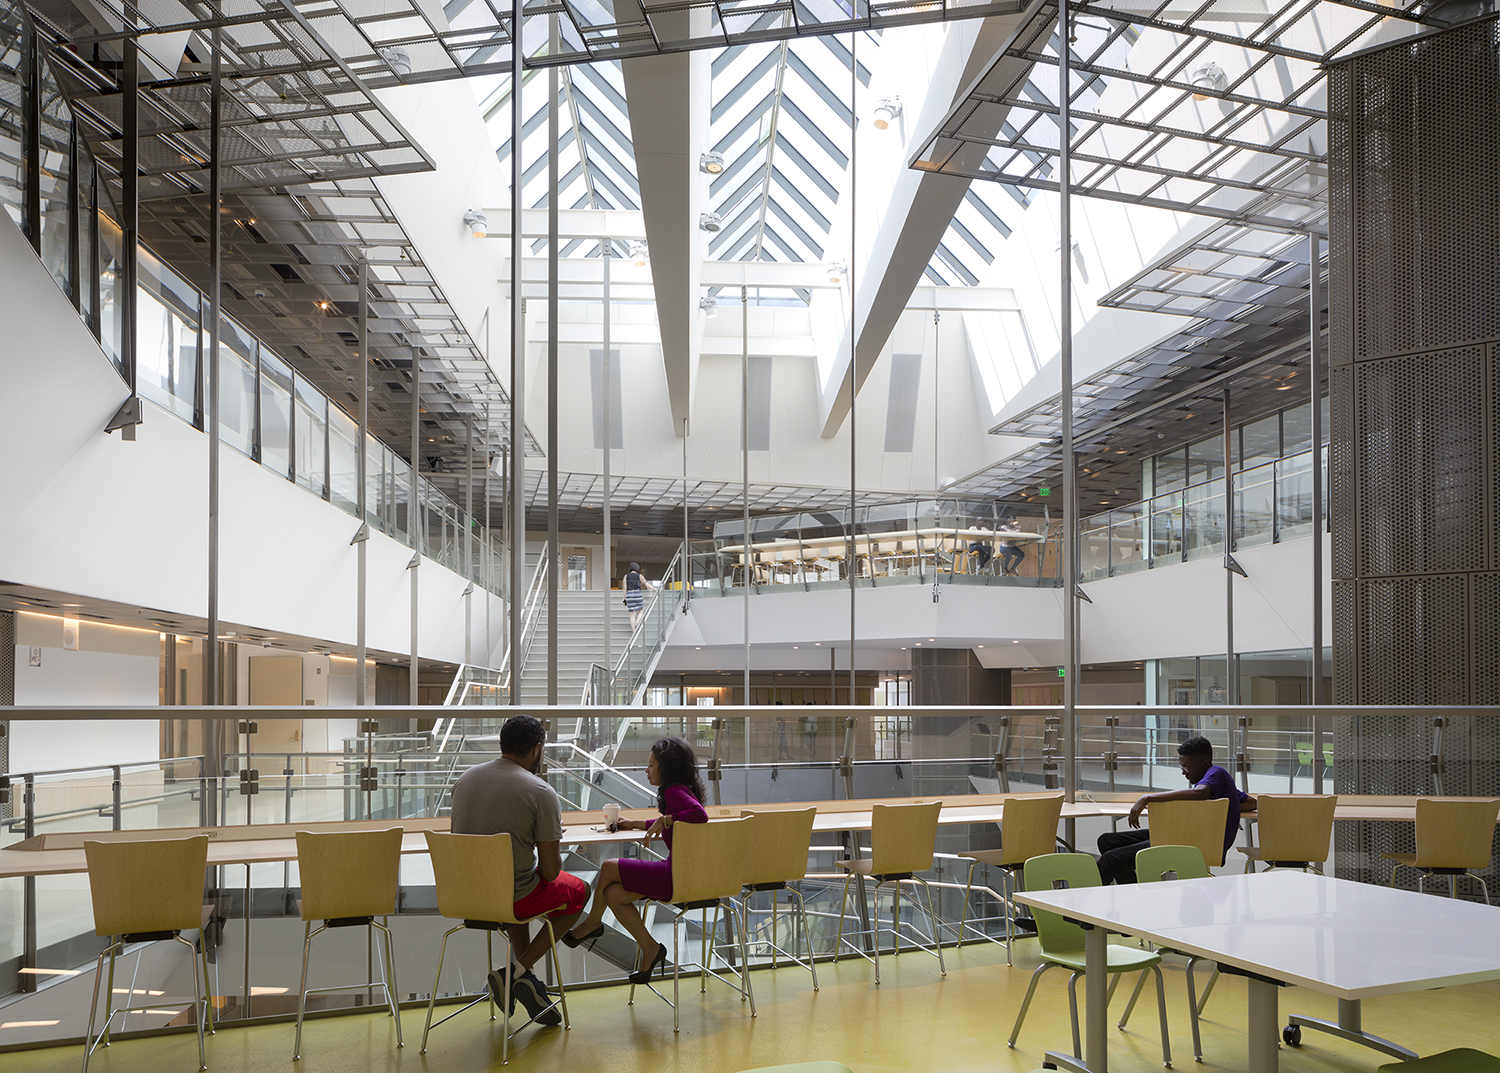 ‘Live technology’ suspension structure in the light filled central learning commons